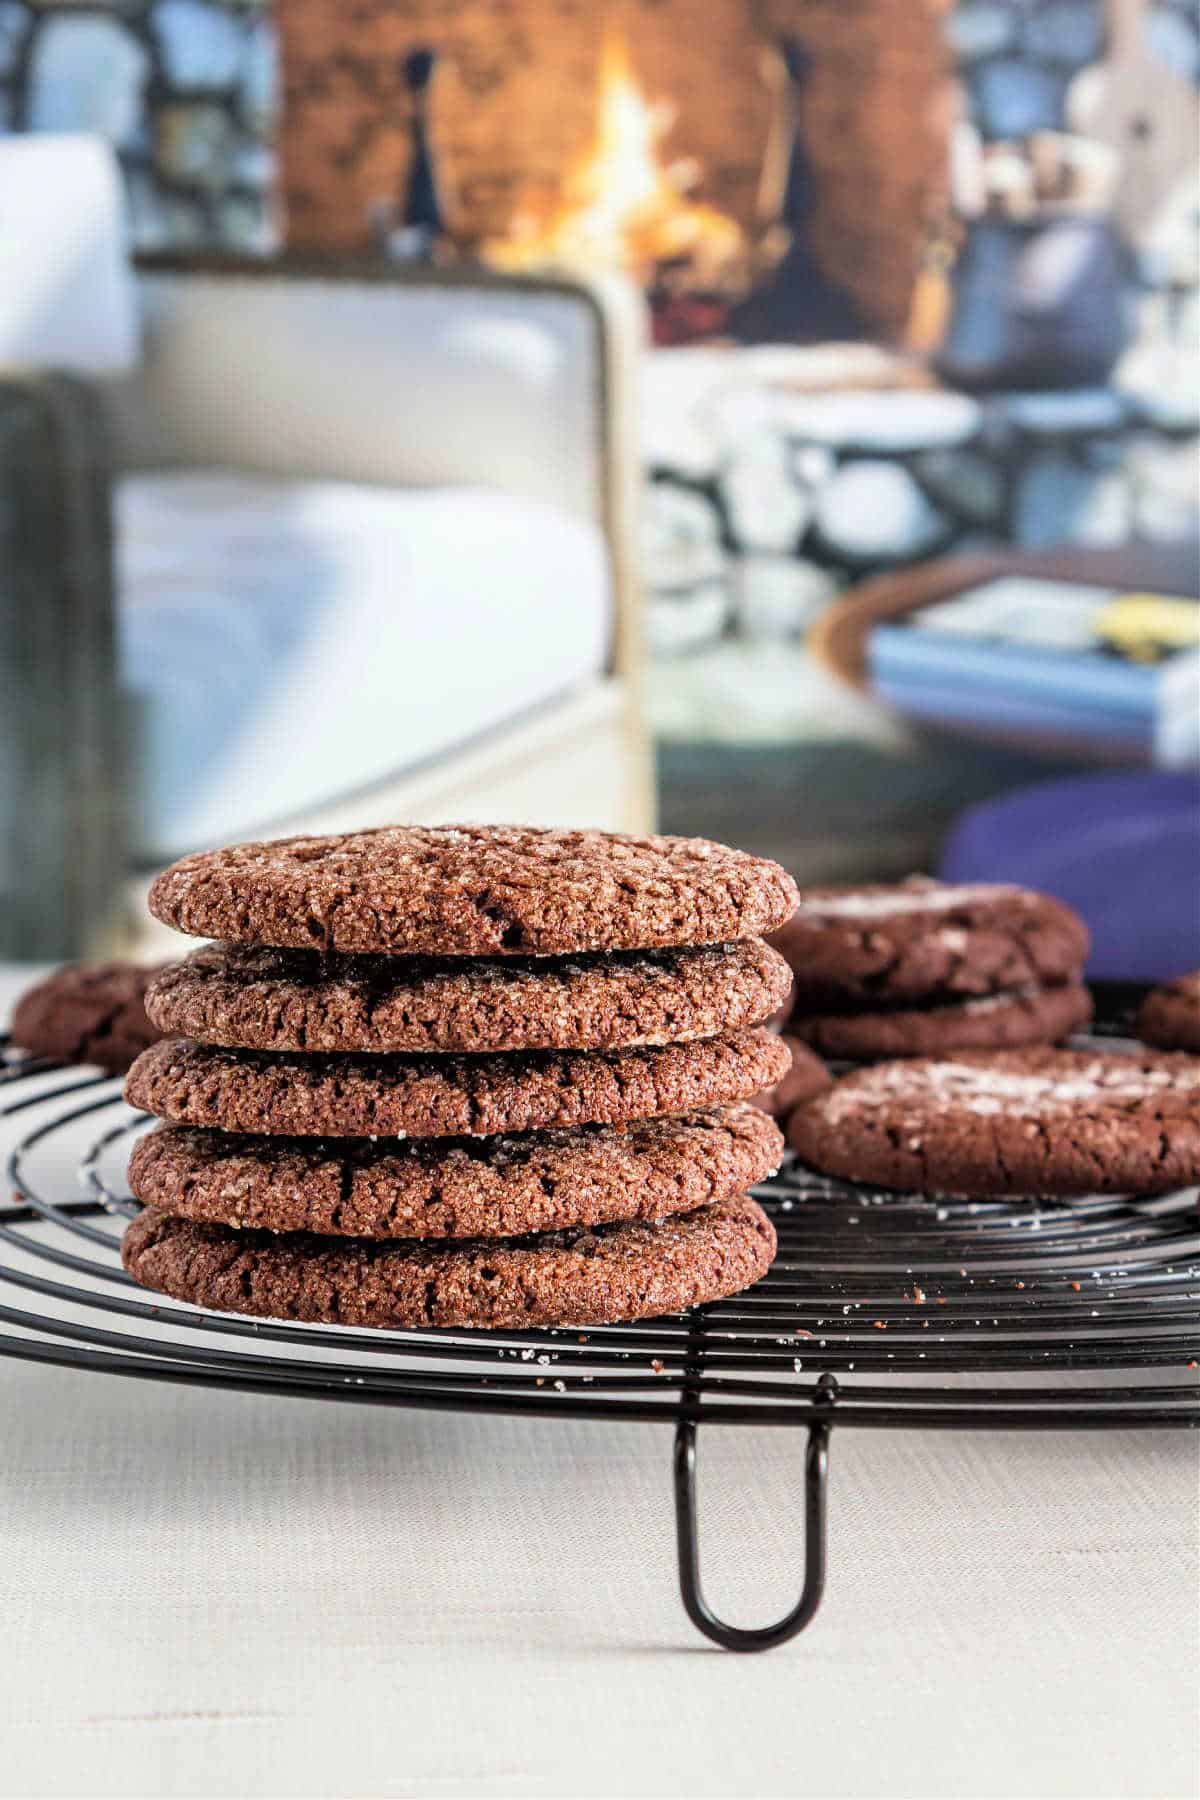 A stack of crisp cocoa cookies on a black cooling rack with a fireplace and chair in the background.